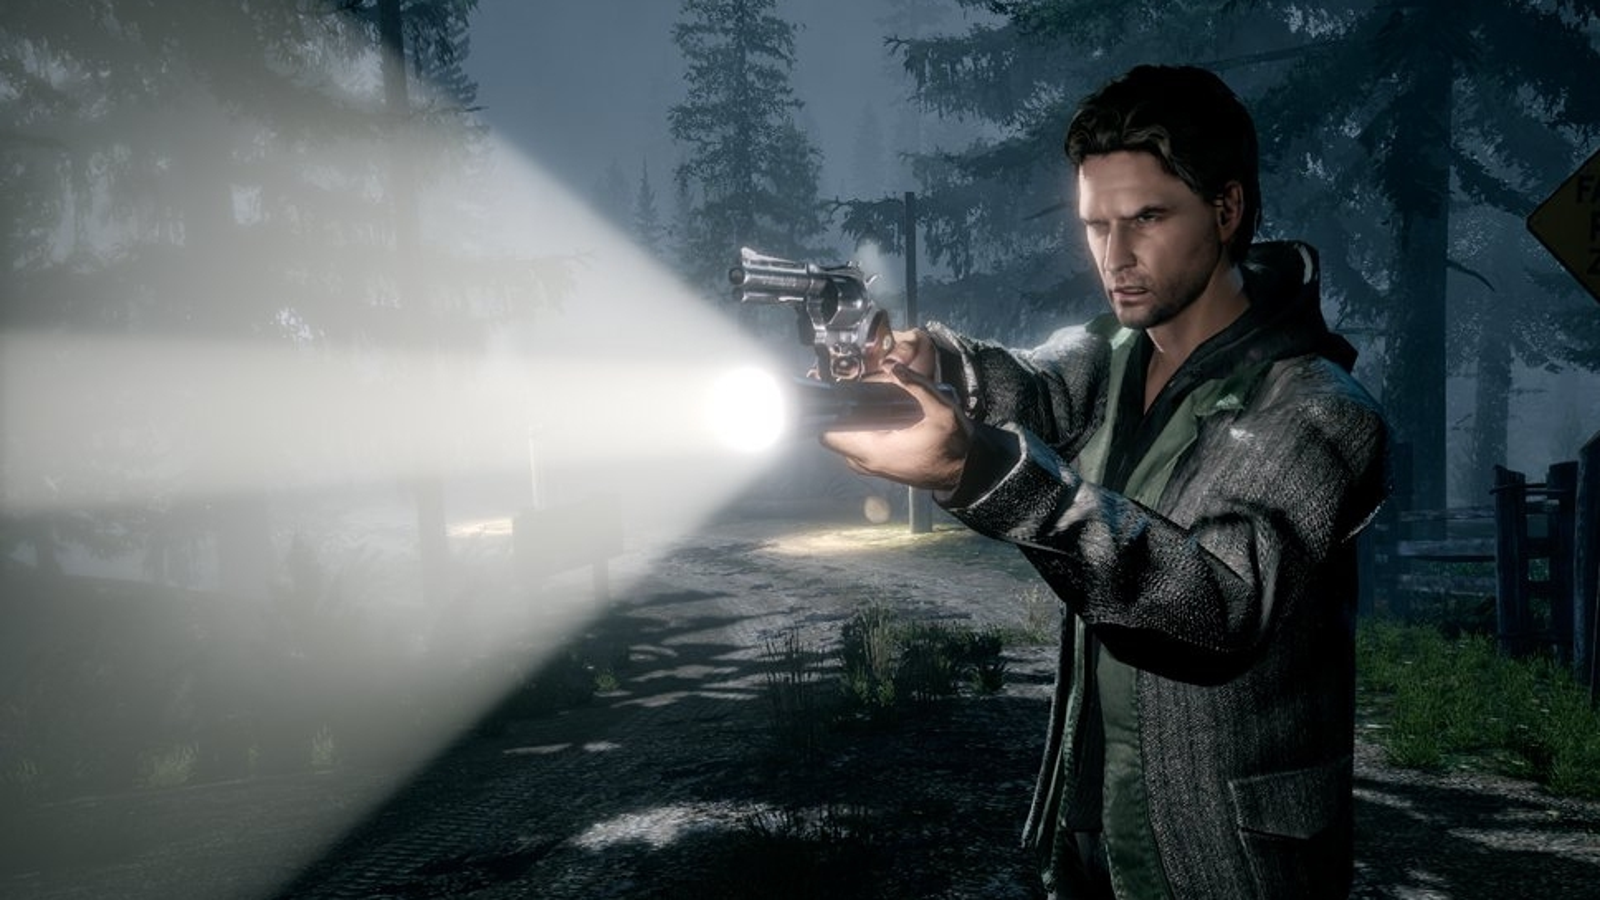 GameSpot on X: After over a decade, Alan Wake is back and